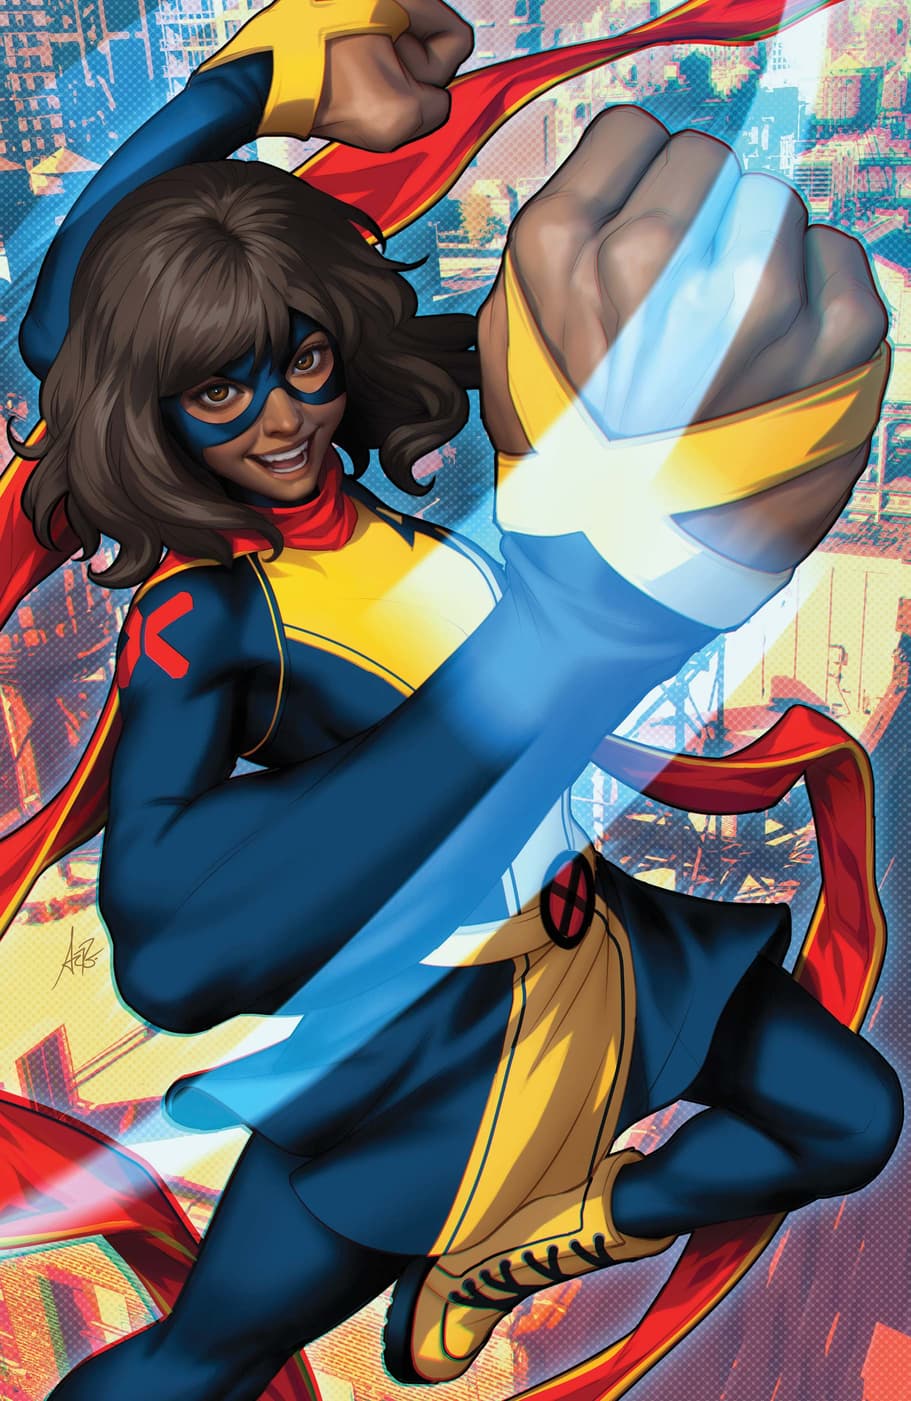 MS. MARVEL: THE NEW MUTANT (2023) #1 variant cover by Stanley "Artgerm" Lau